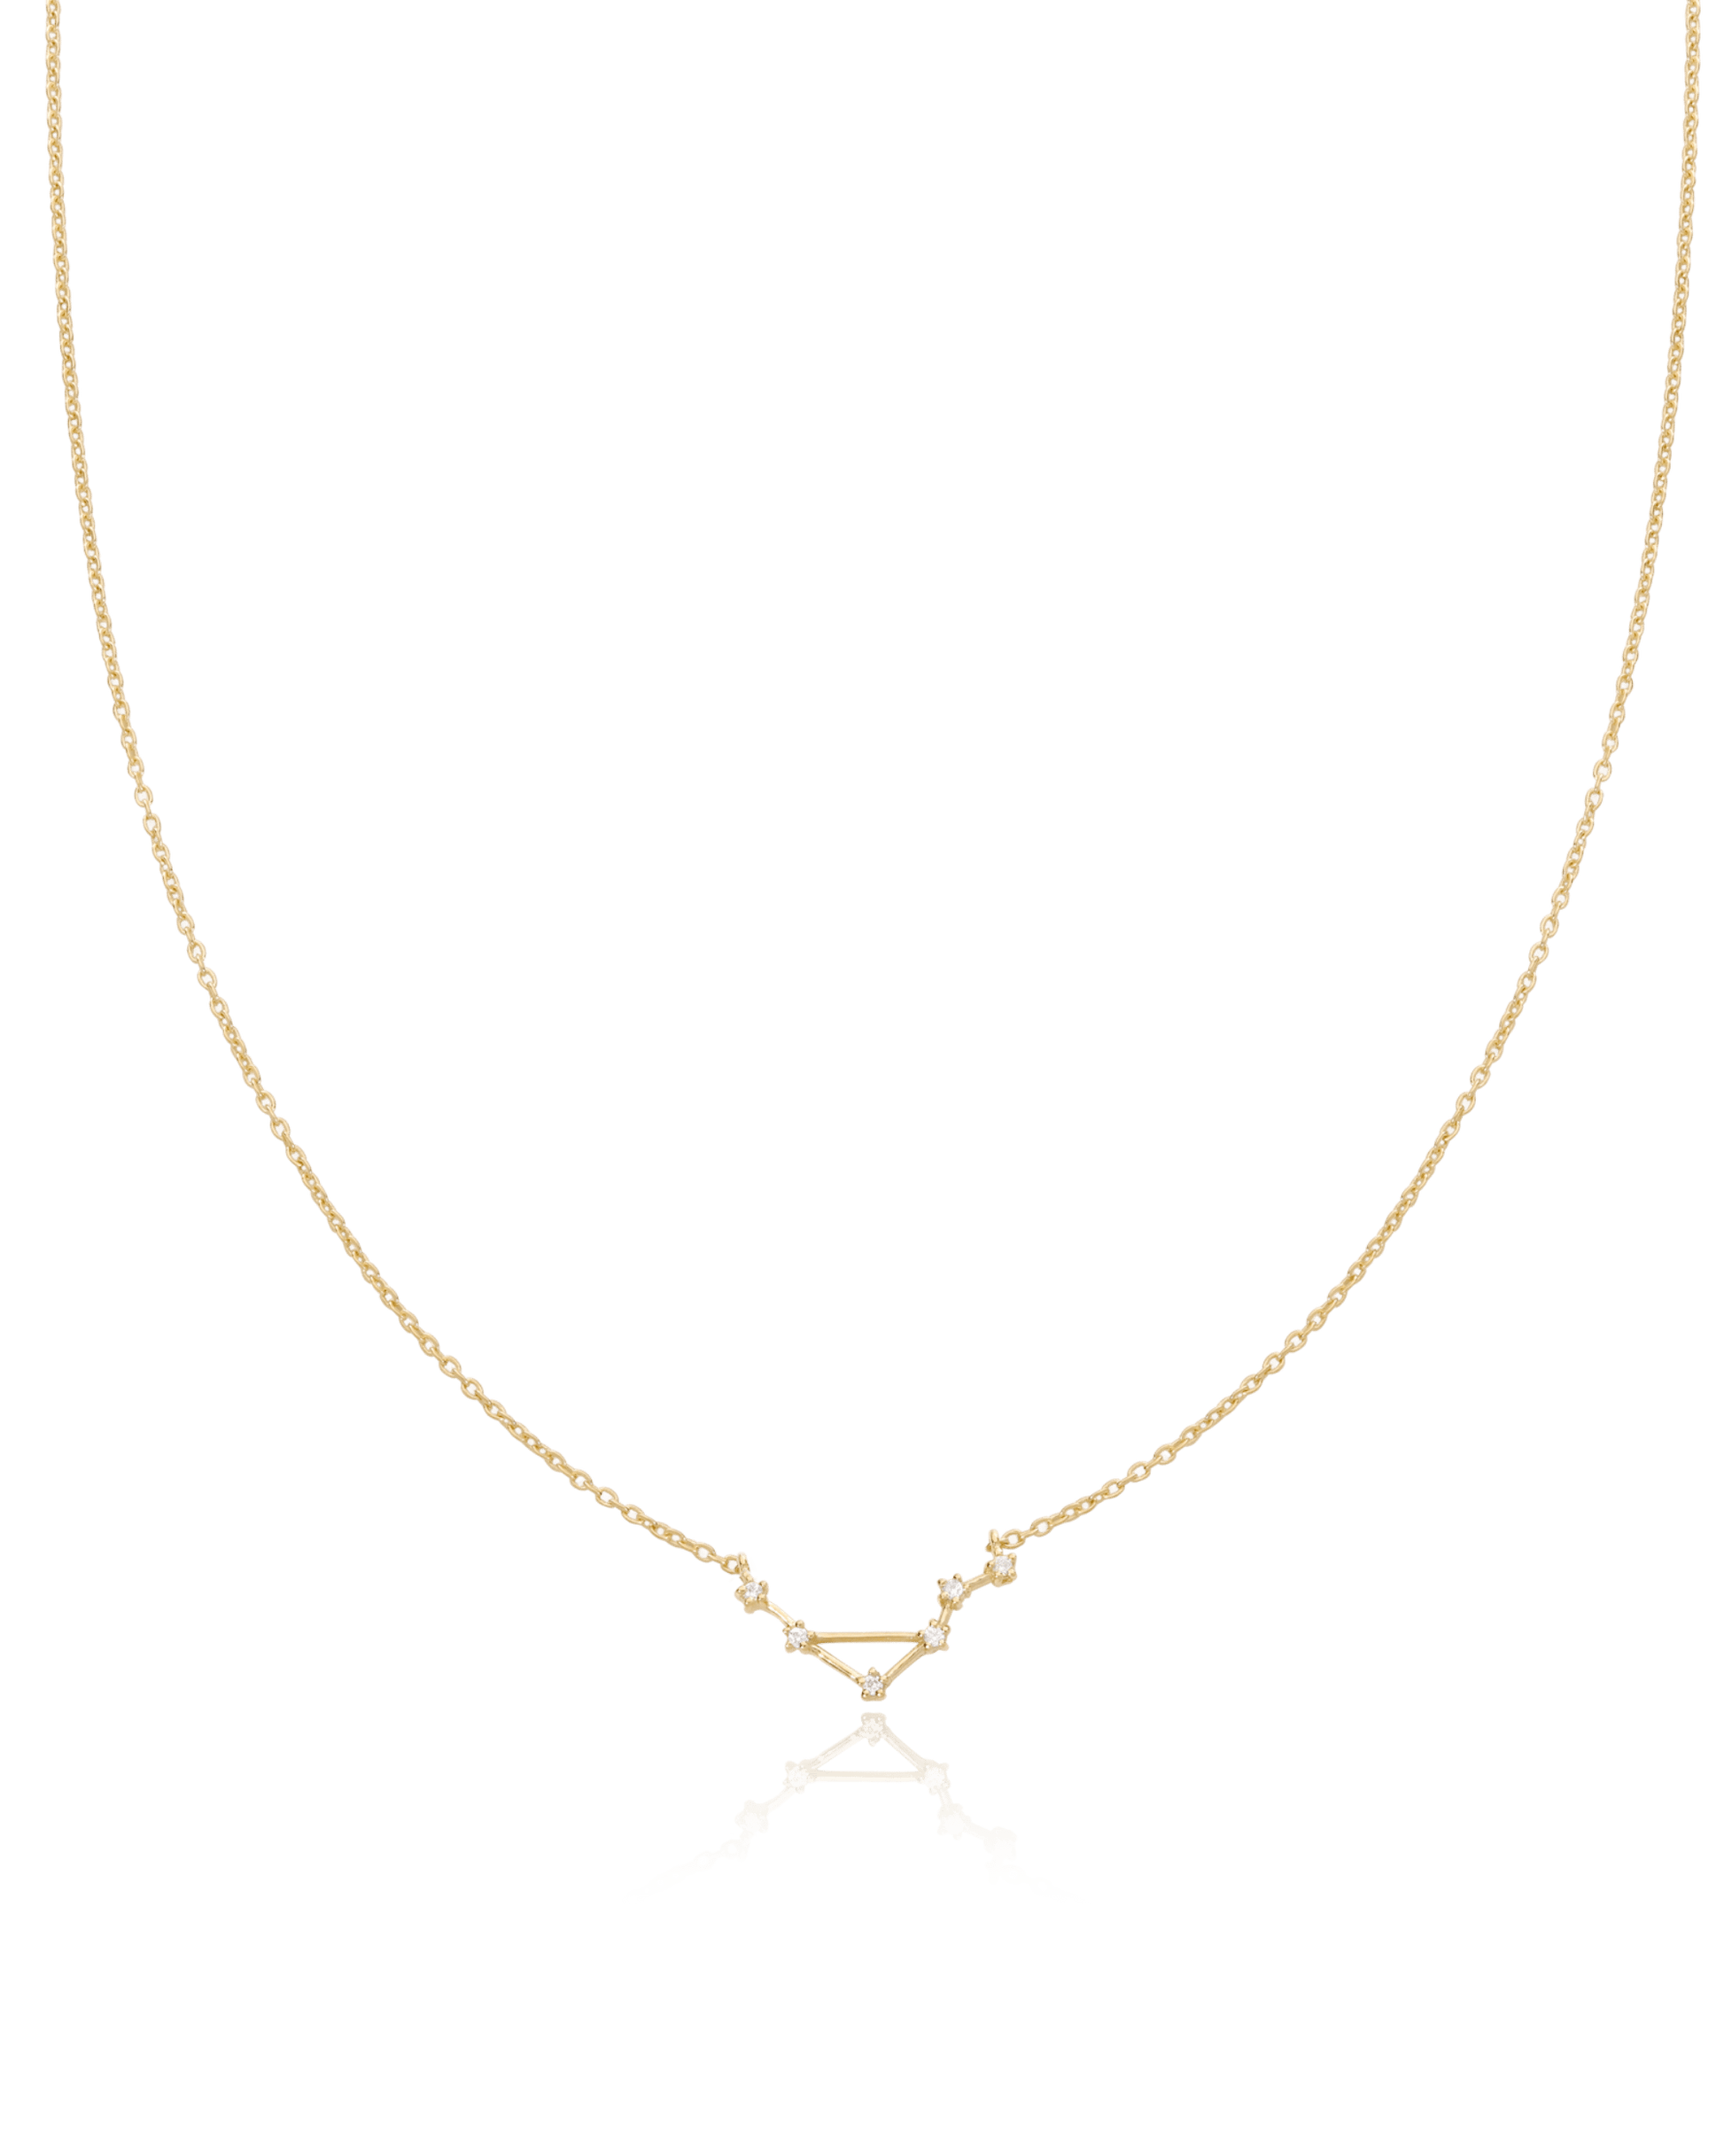 Single Constellation Necklace with Diamonds - 18K Rose Vermeil Necklaces magal-dev 